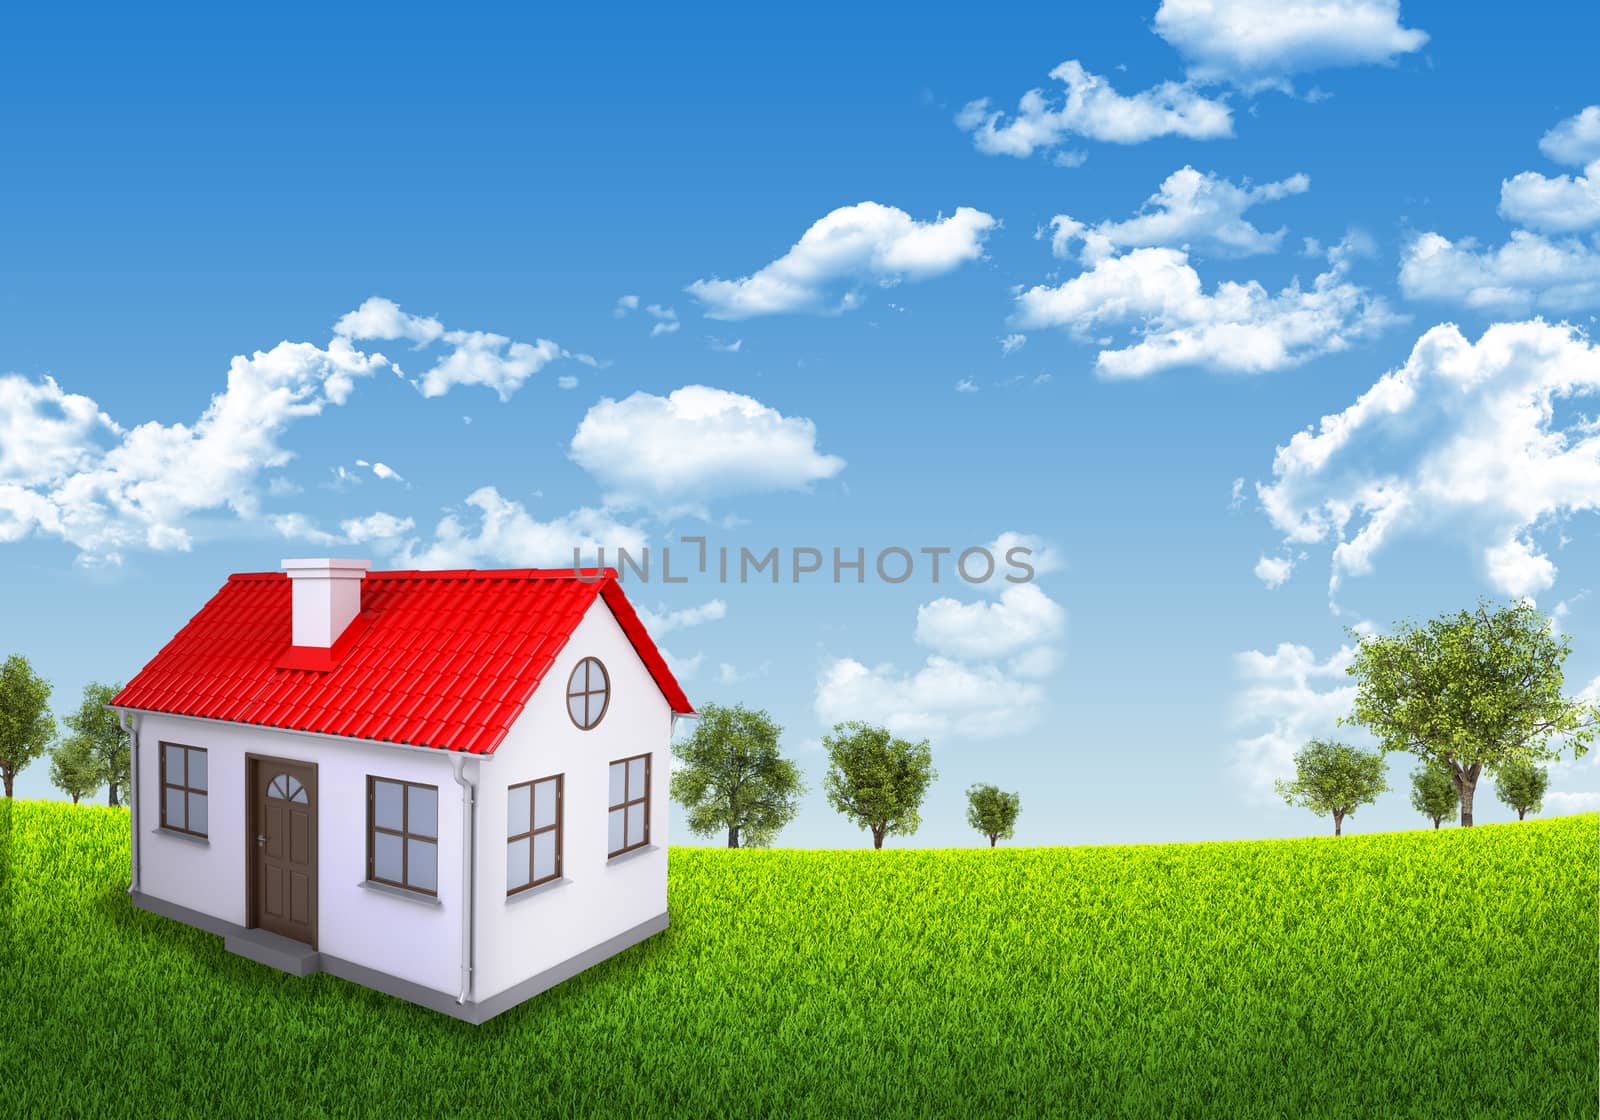 House green field under blue sky with white clouds, nature background